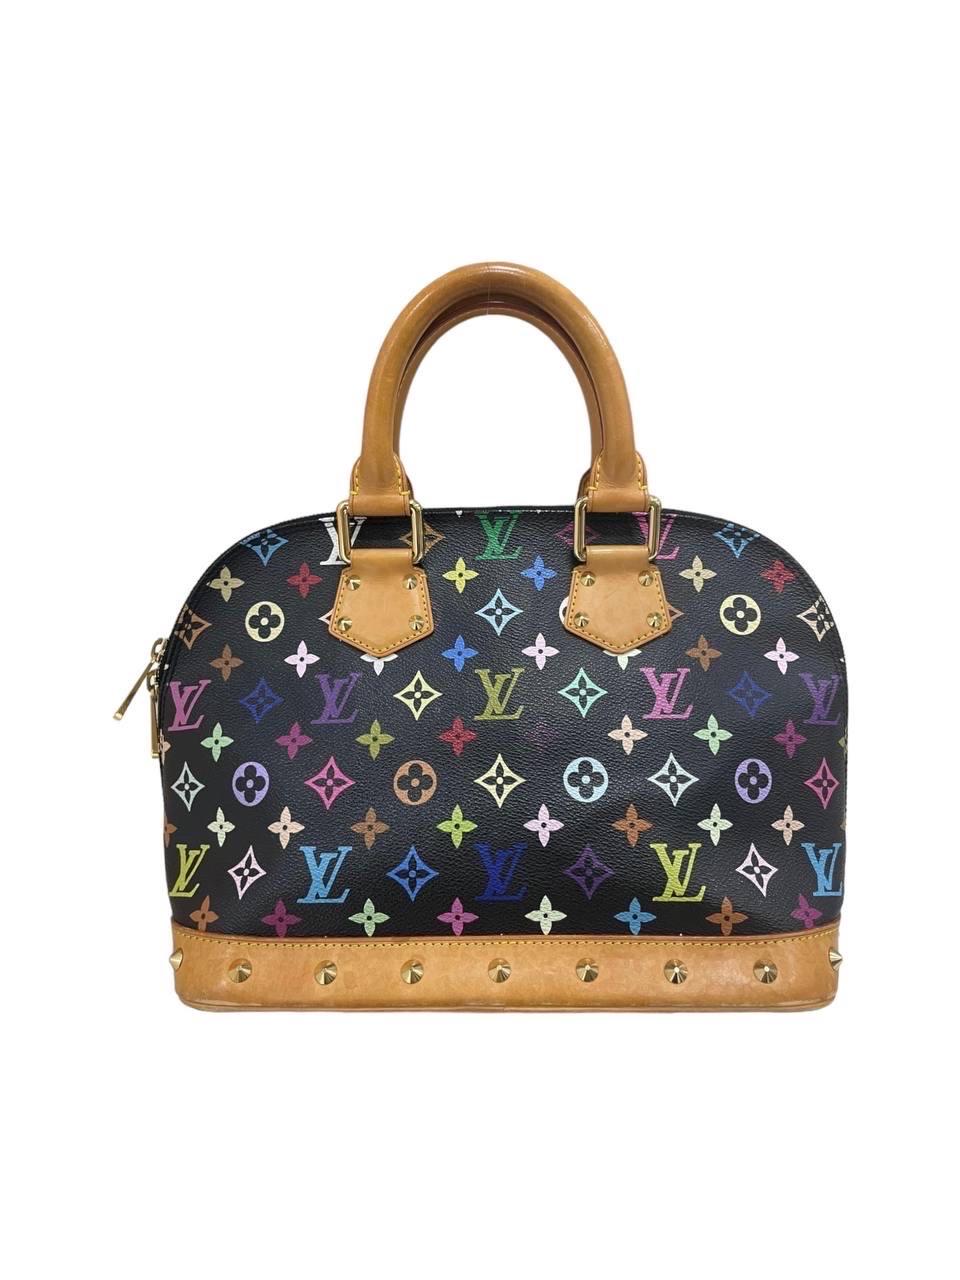 Louis Vuitton Alma MM Takashi Murakami In Excellent Condition For Sale In Torre Del Greco, IT